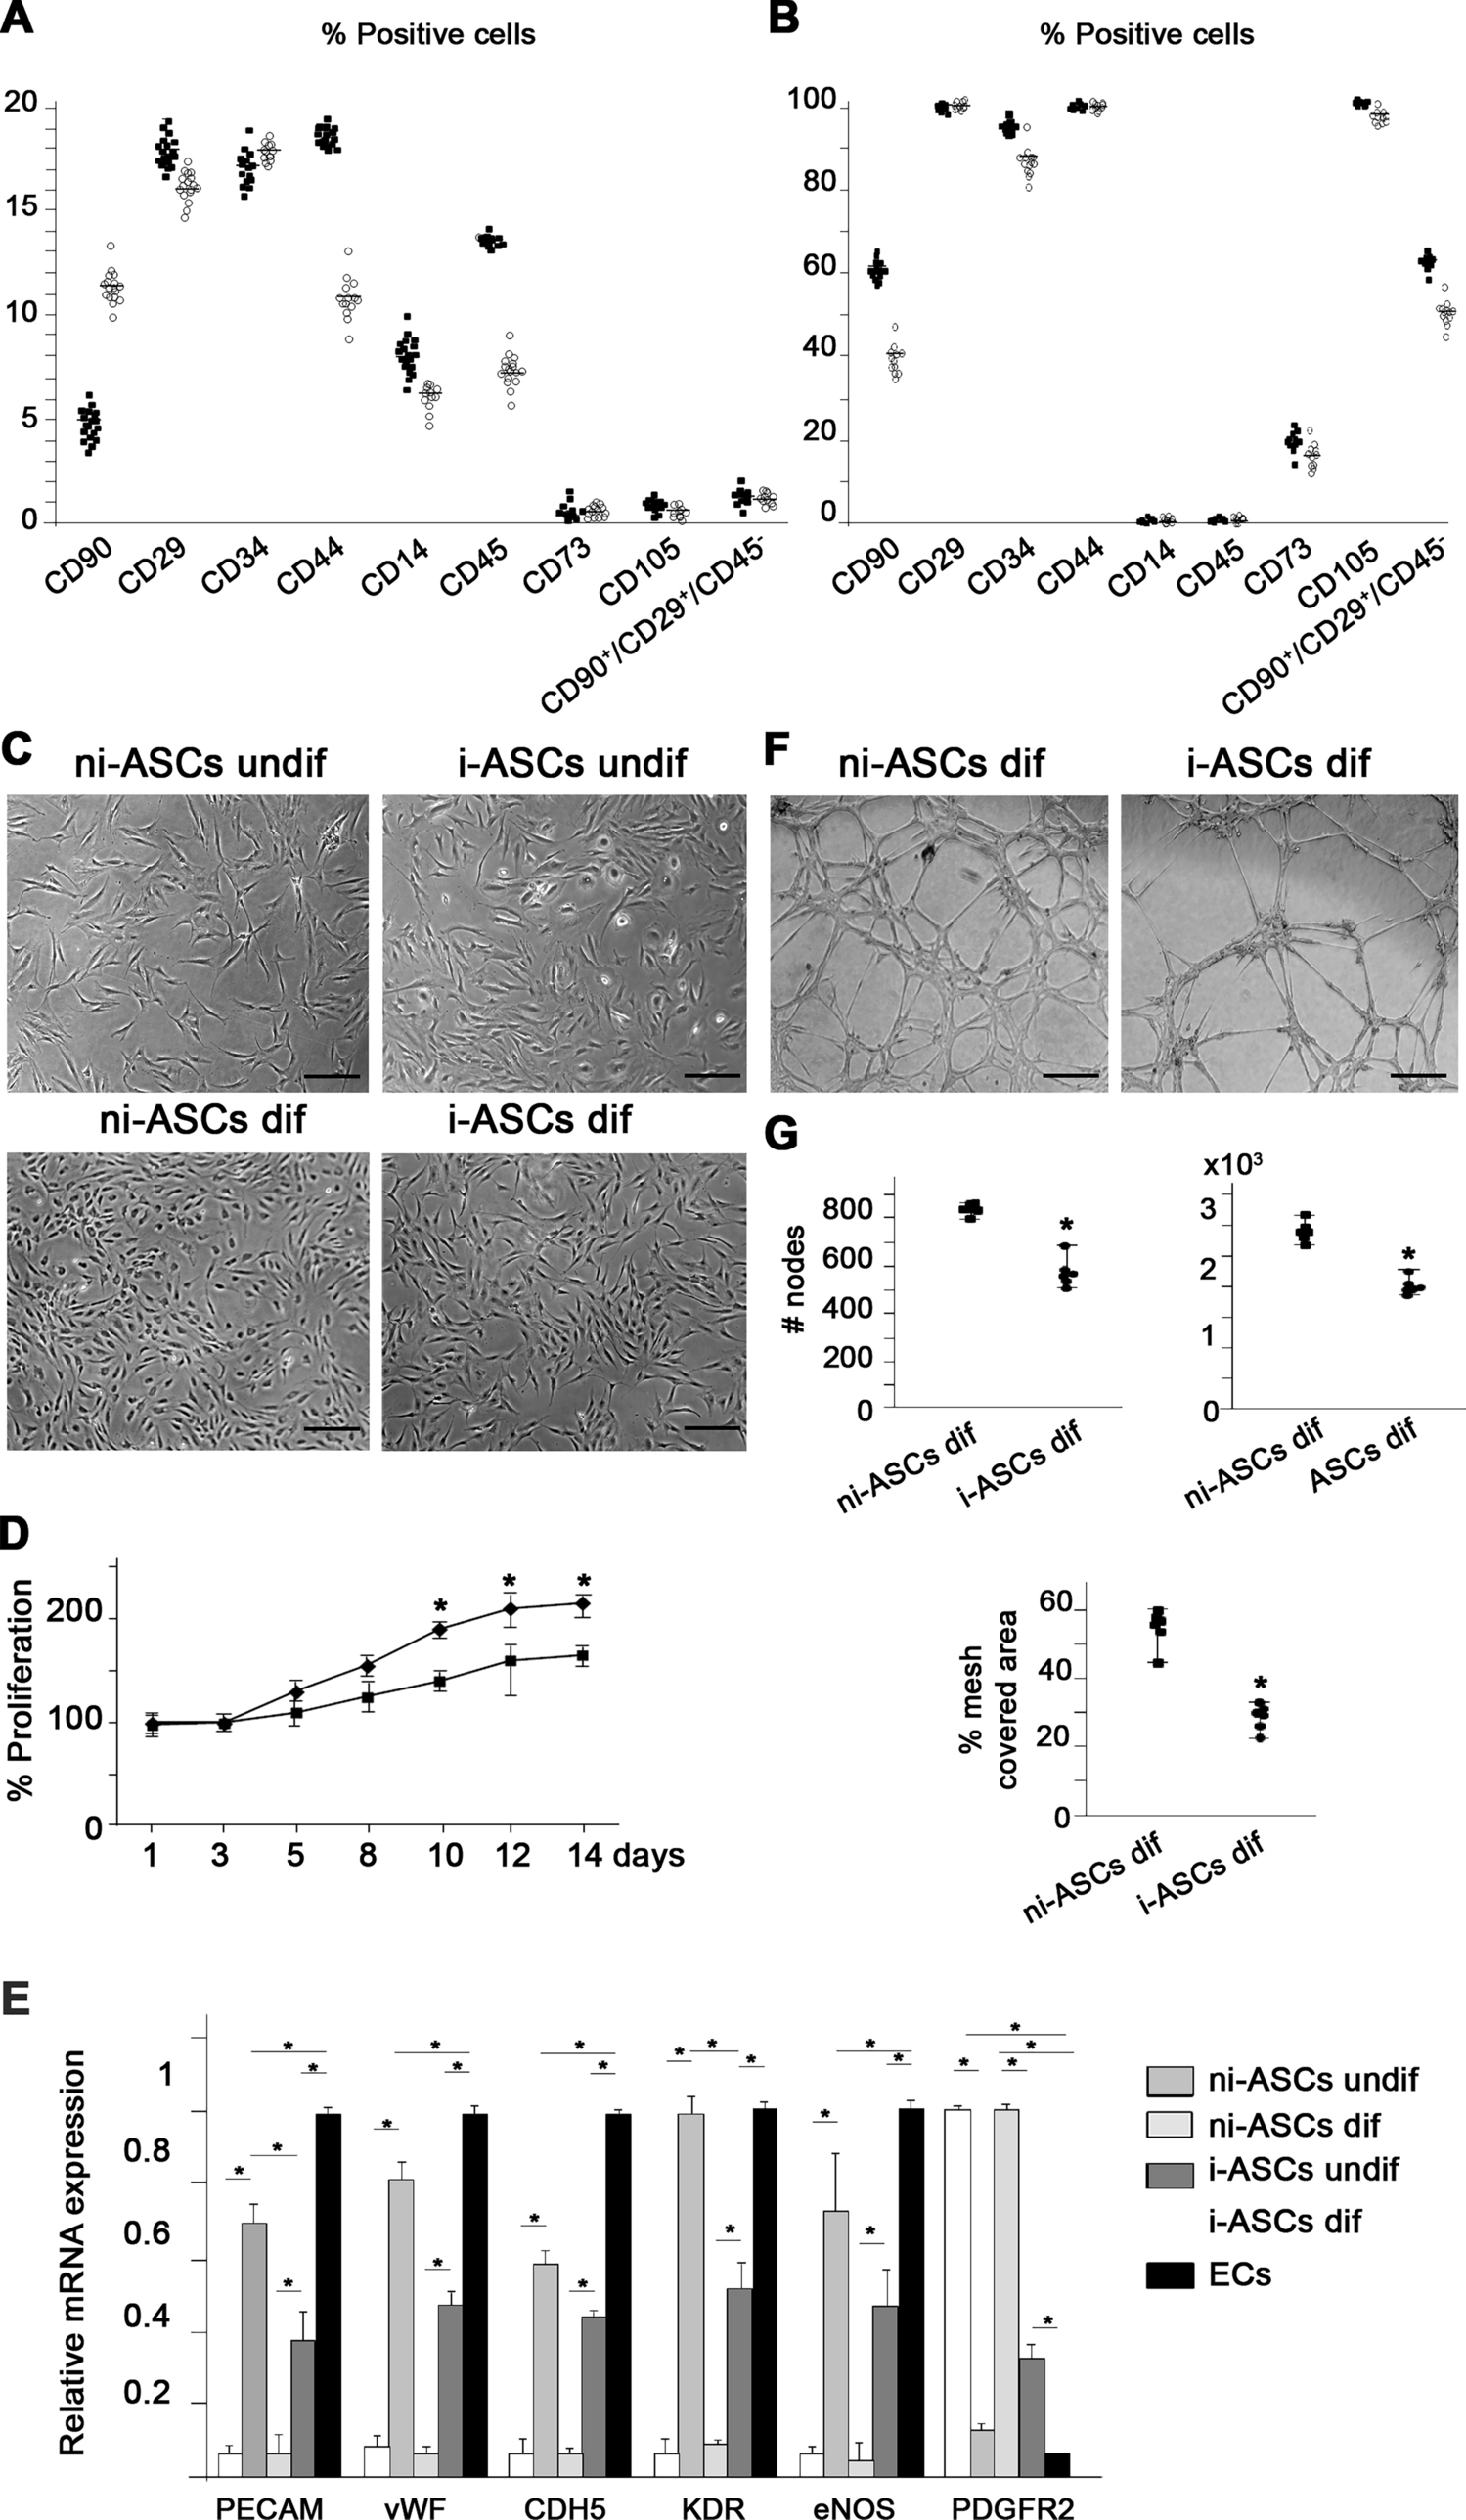 Crosstalk of human coronary perivascular adipose-derived stem cells with vascular cells: role of tissue factor